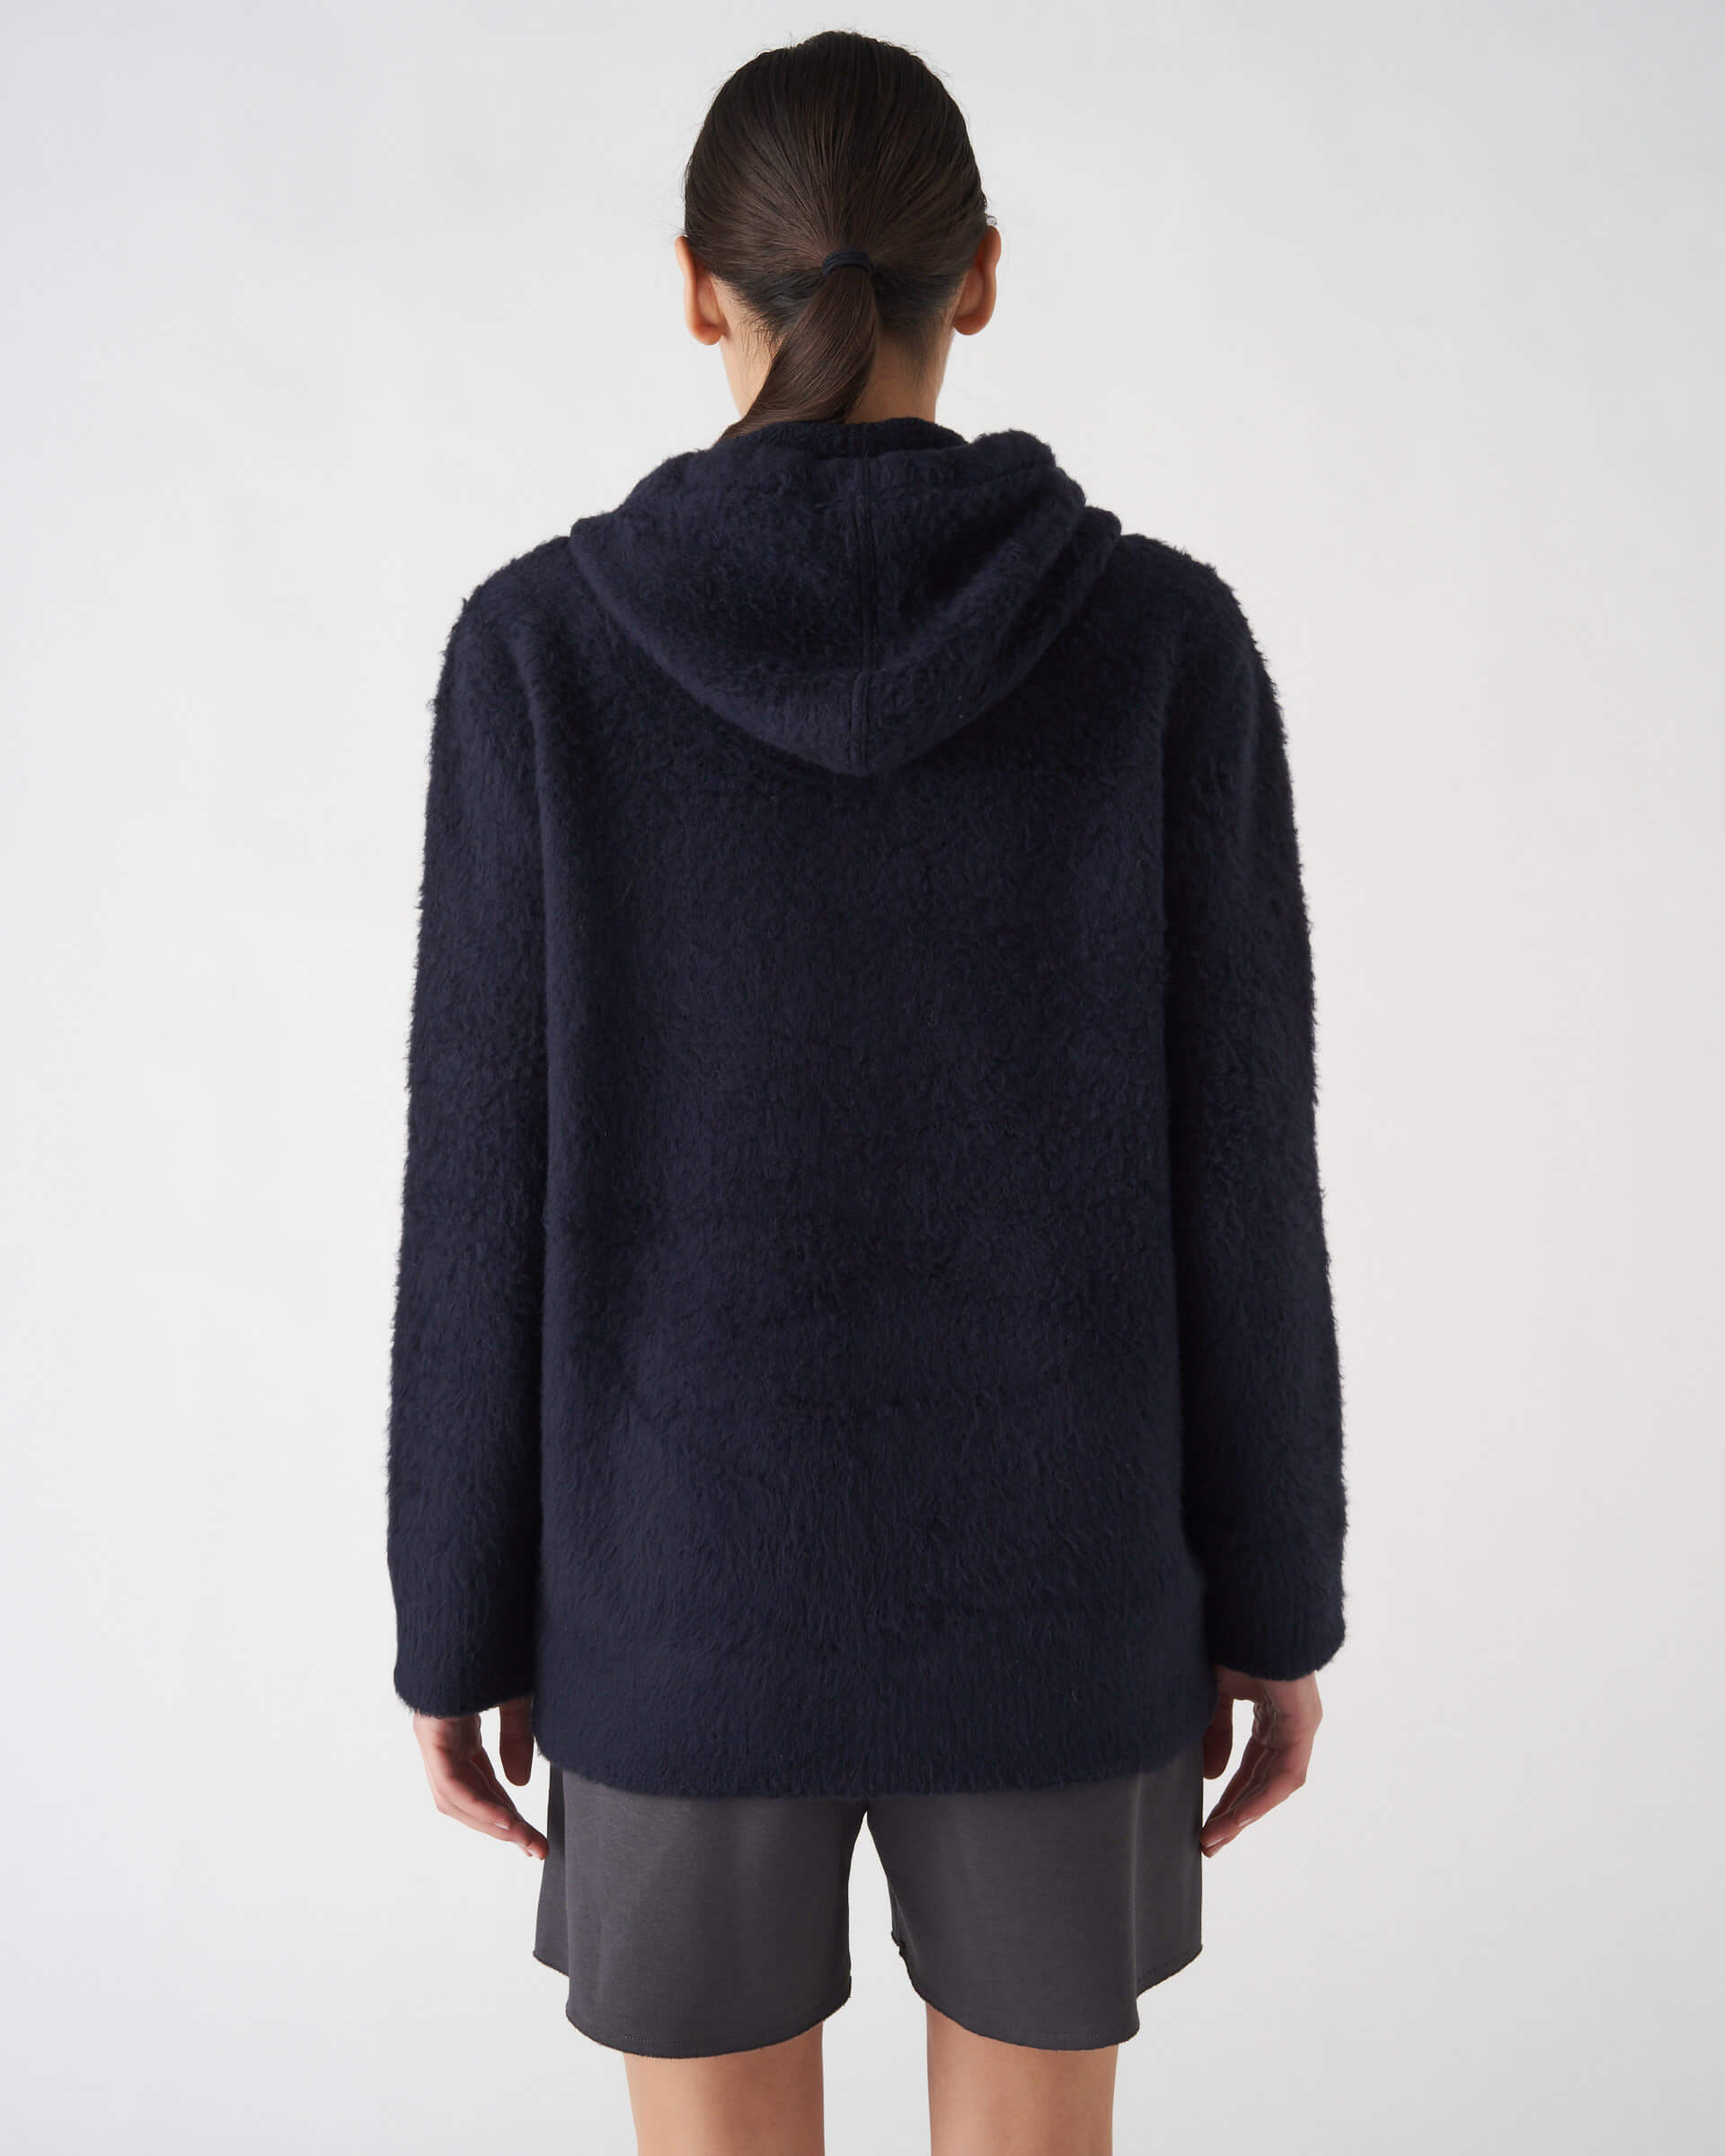 The Market Store | Crew Neck Sweater Without Gauze